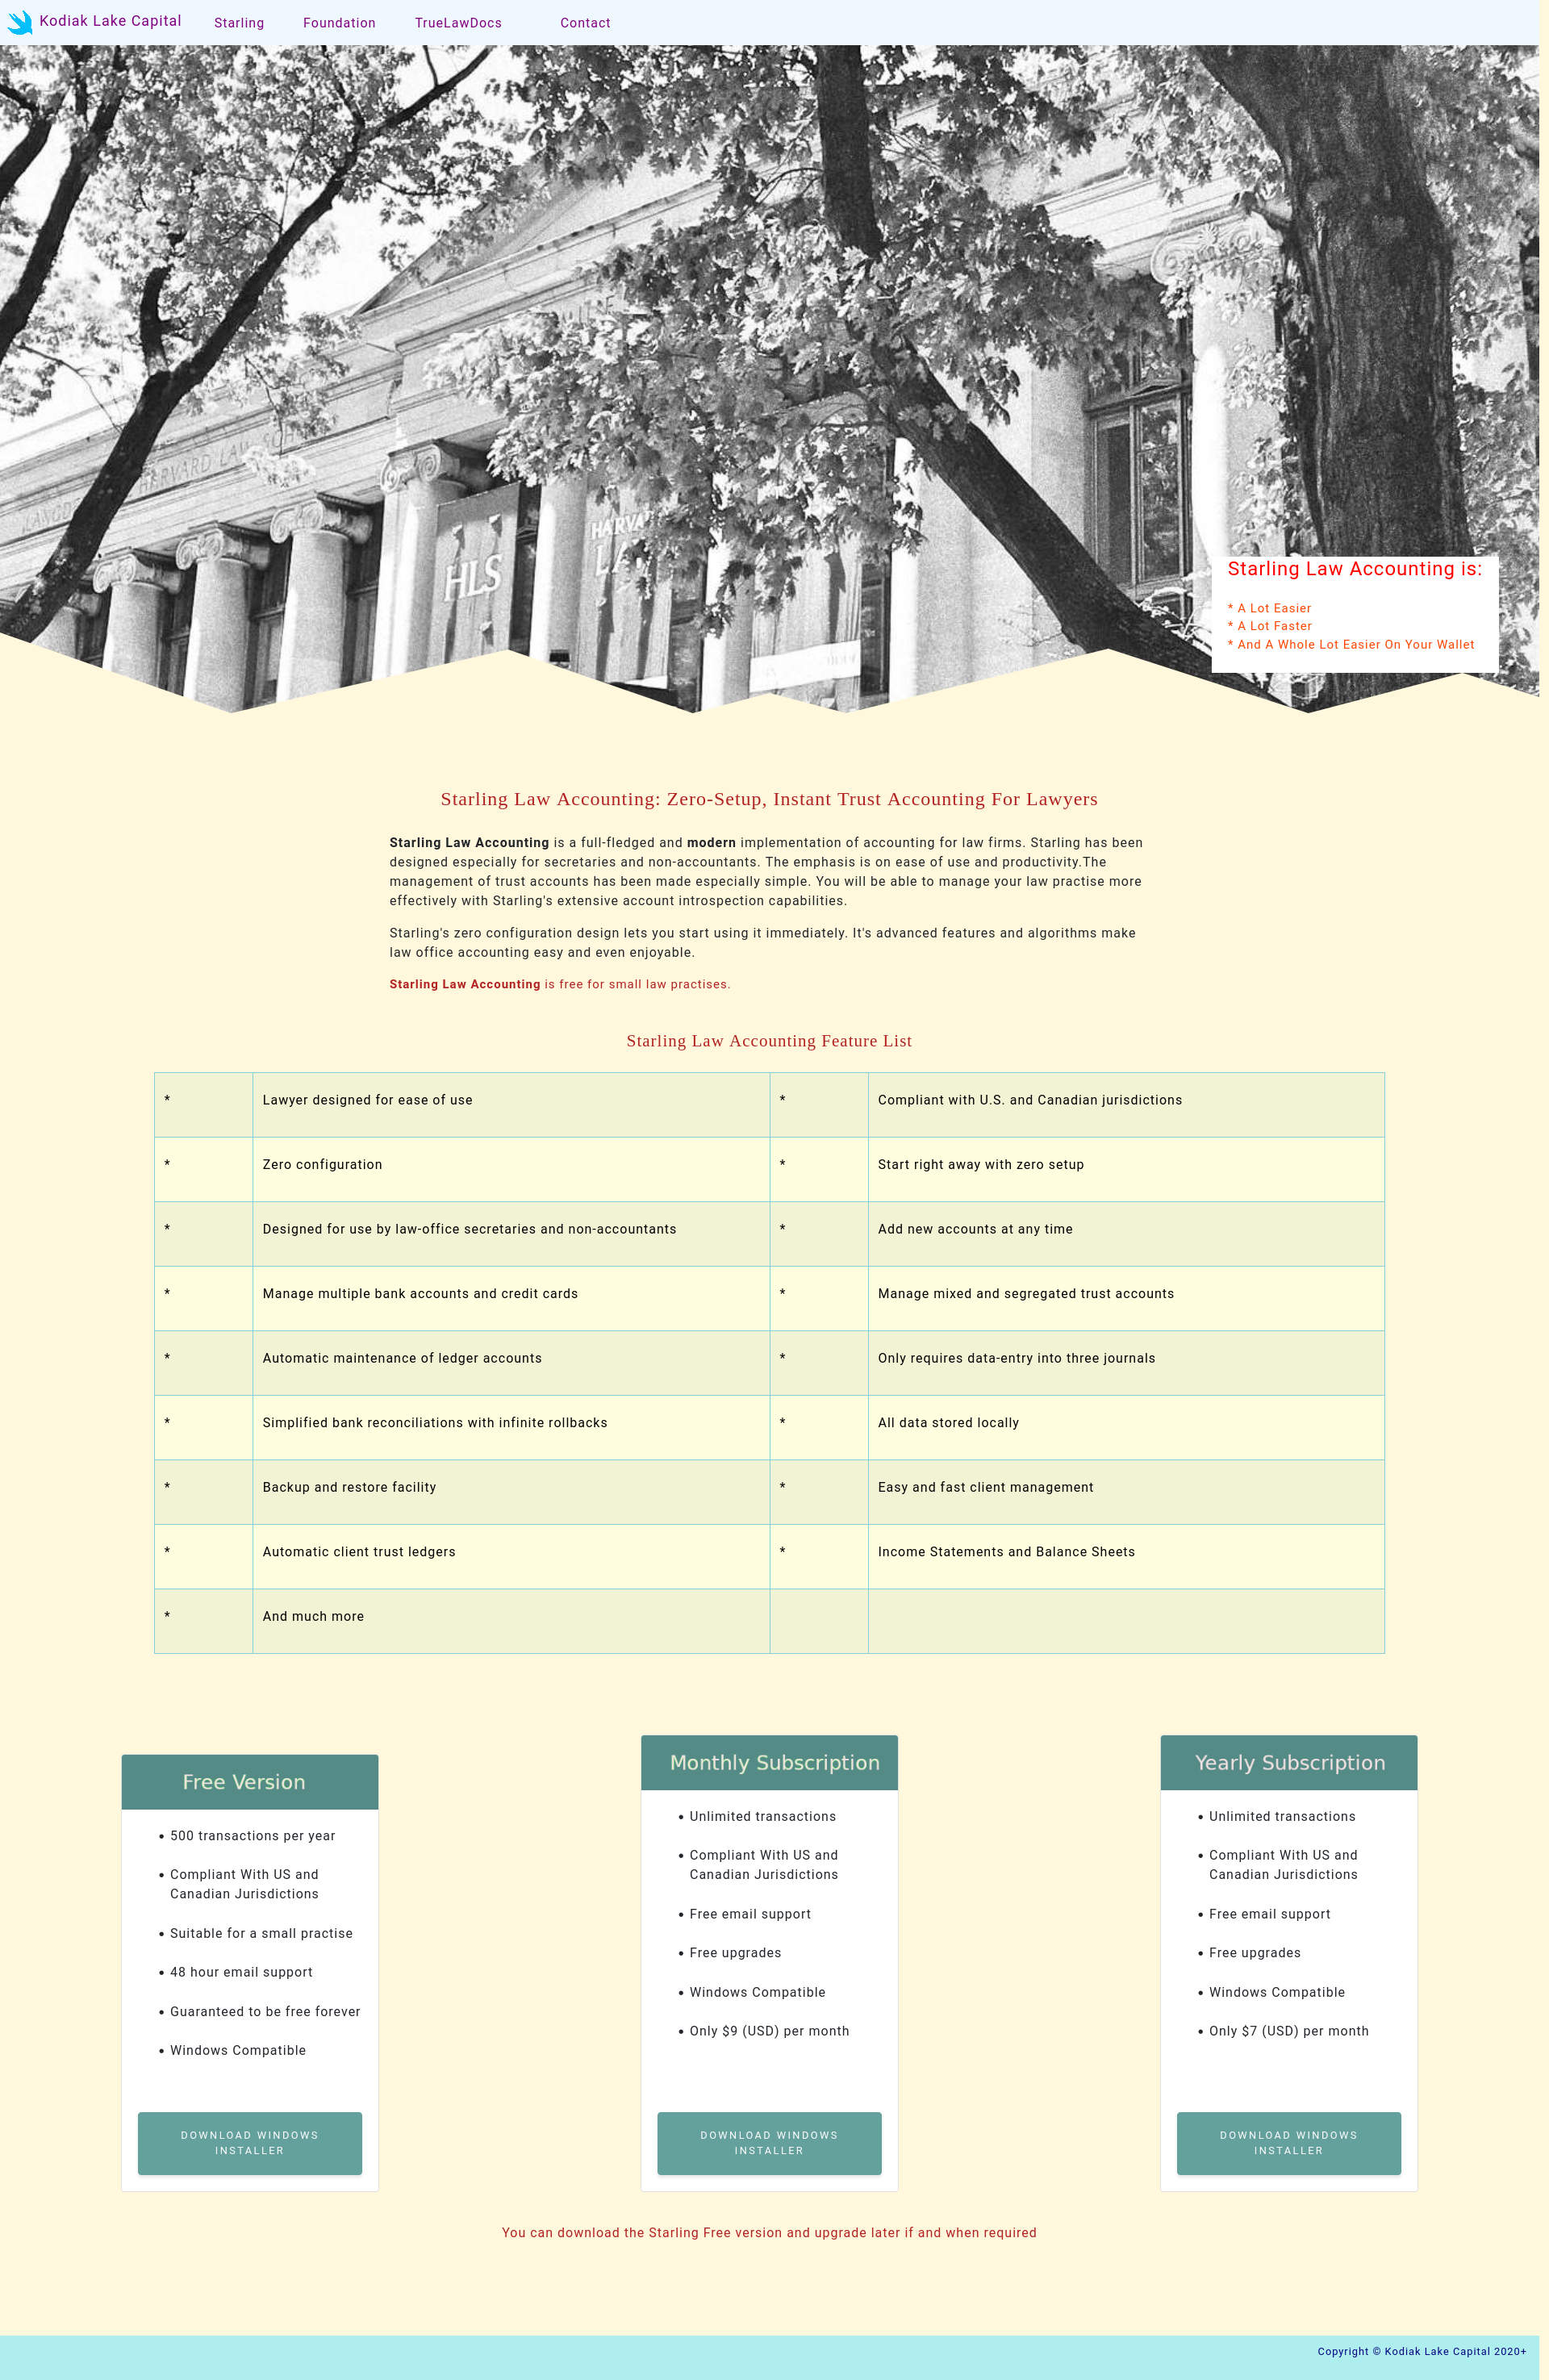 Starling Law Accounting by KodiakLakeCapital Landing page